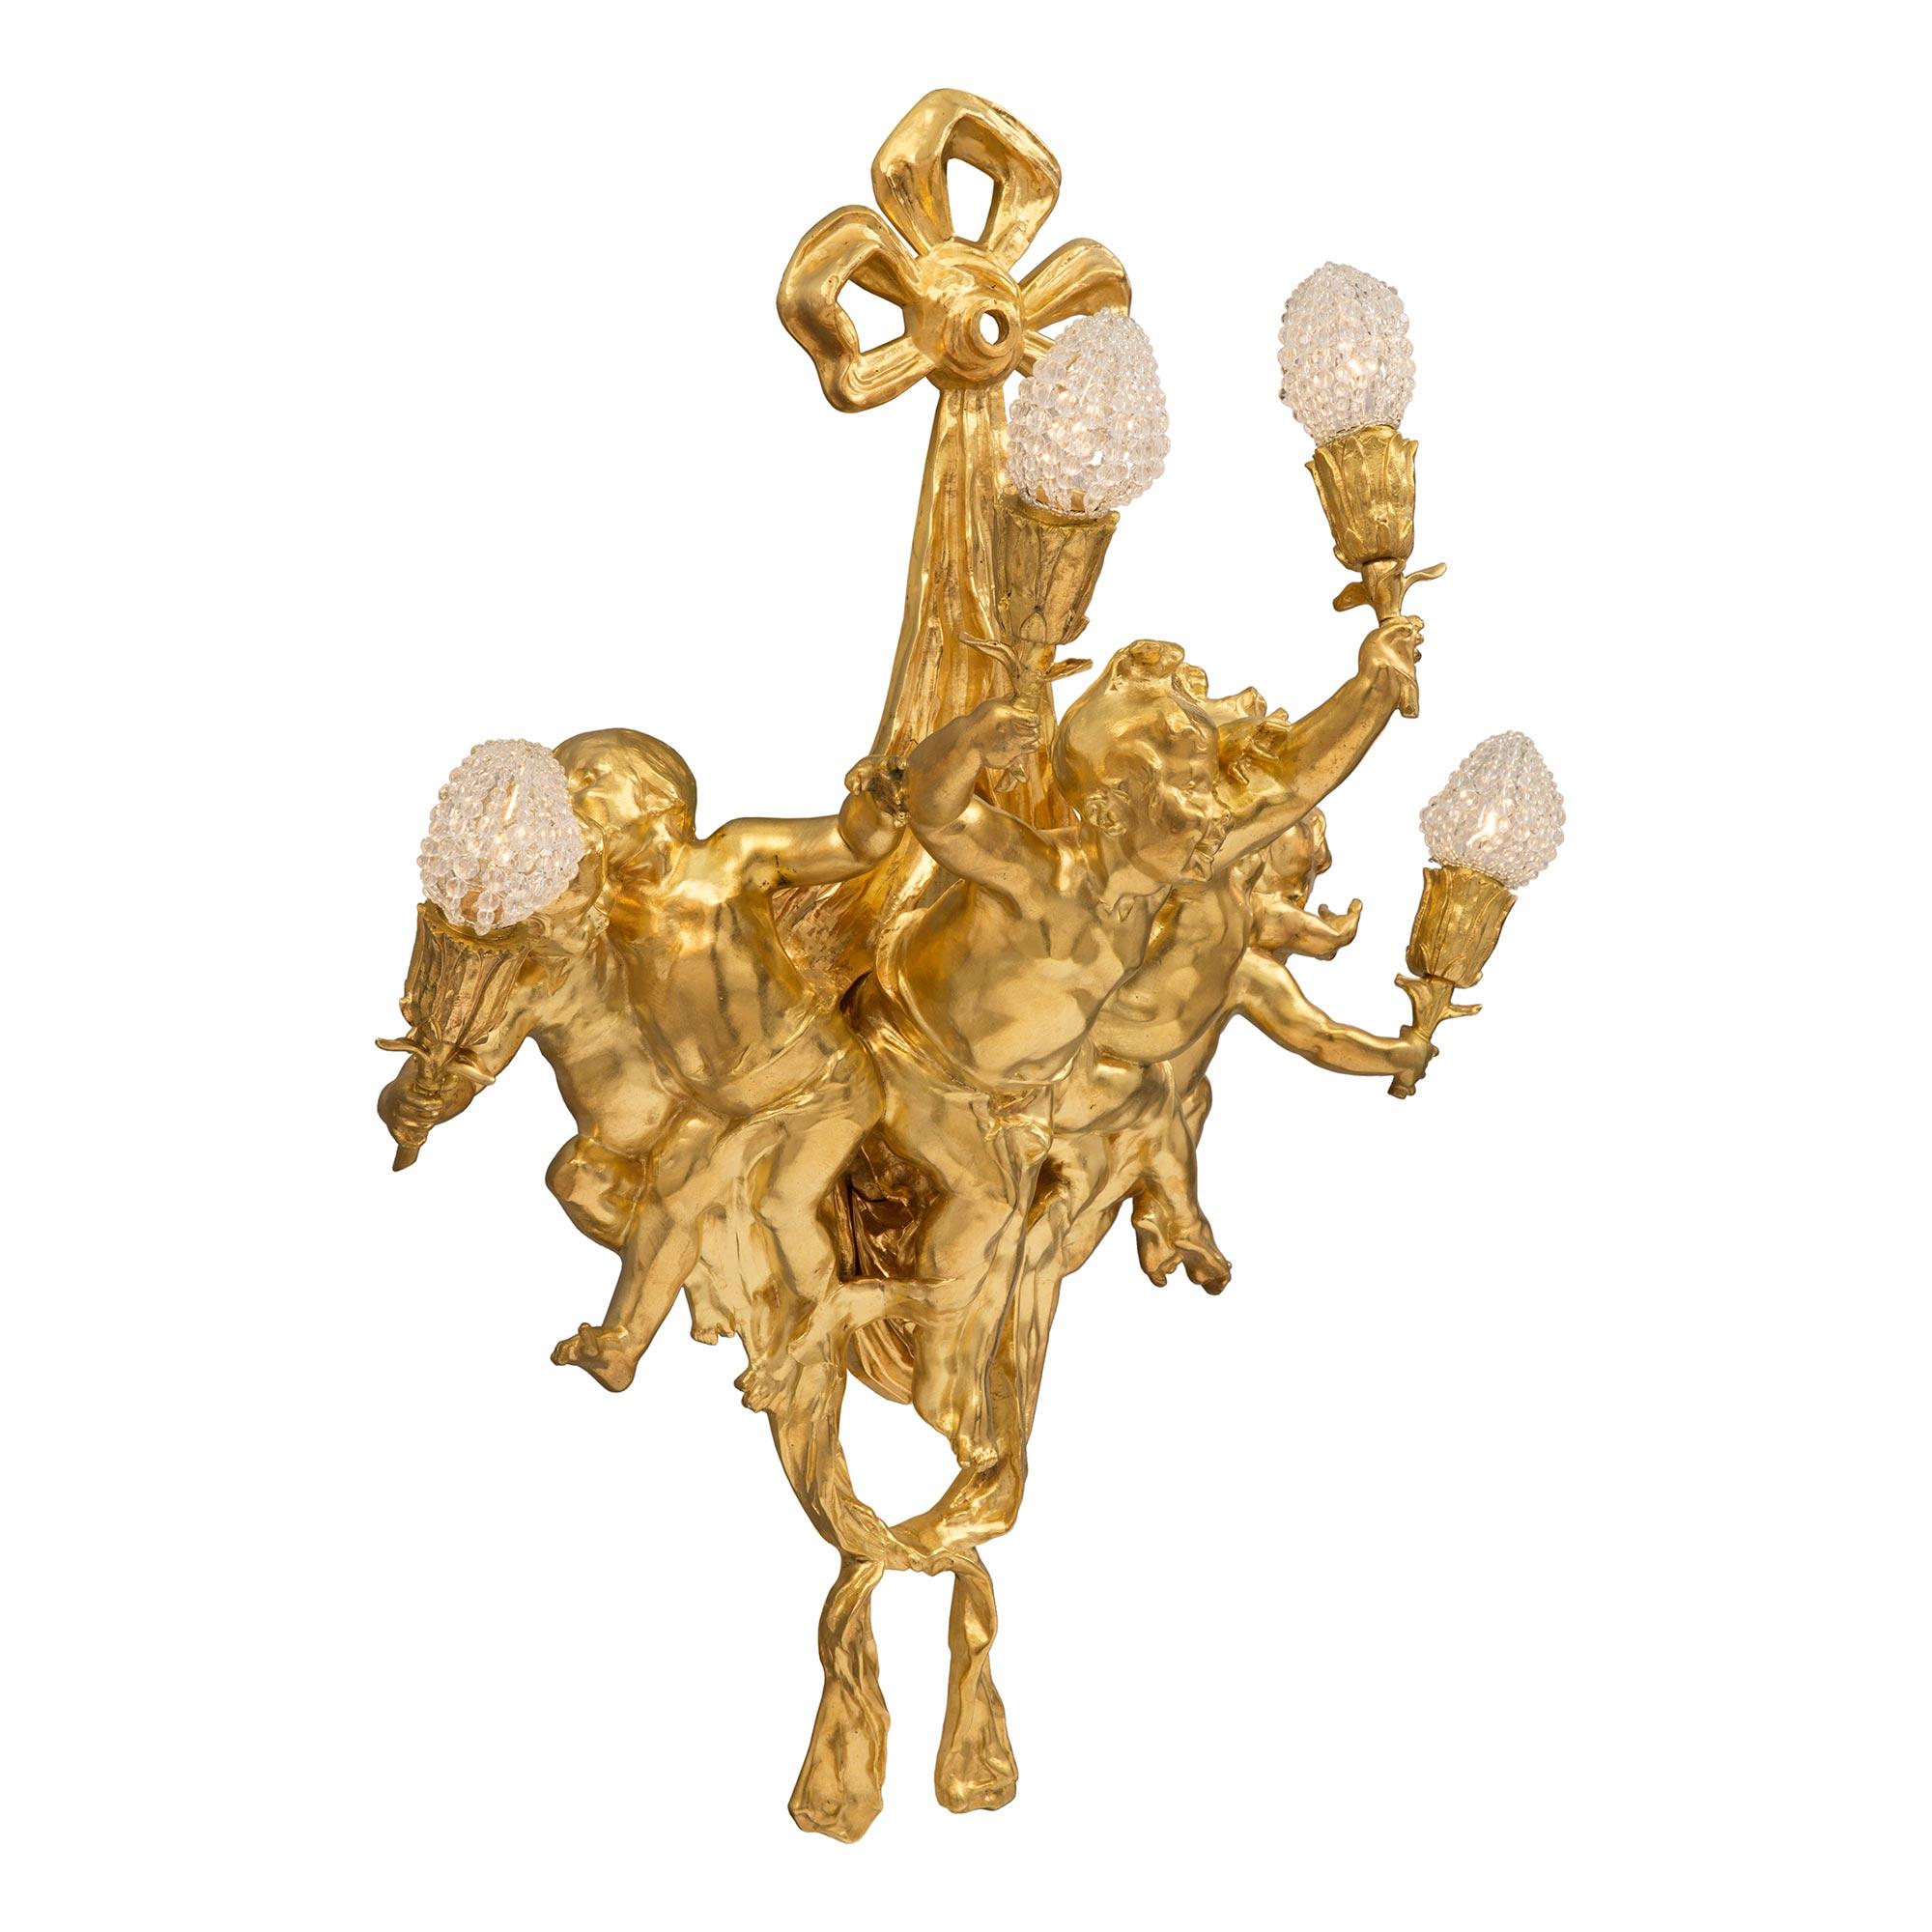 A striking French 19th century Louis XVI style Belle Époque Period four arm ormolu sconce. The sconce is centered by a lovely bottom tied swaging fabric. At the center are five most charming richly chased cherubs dancing and playing, while holding